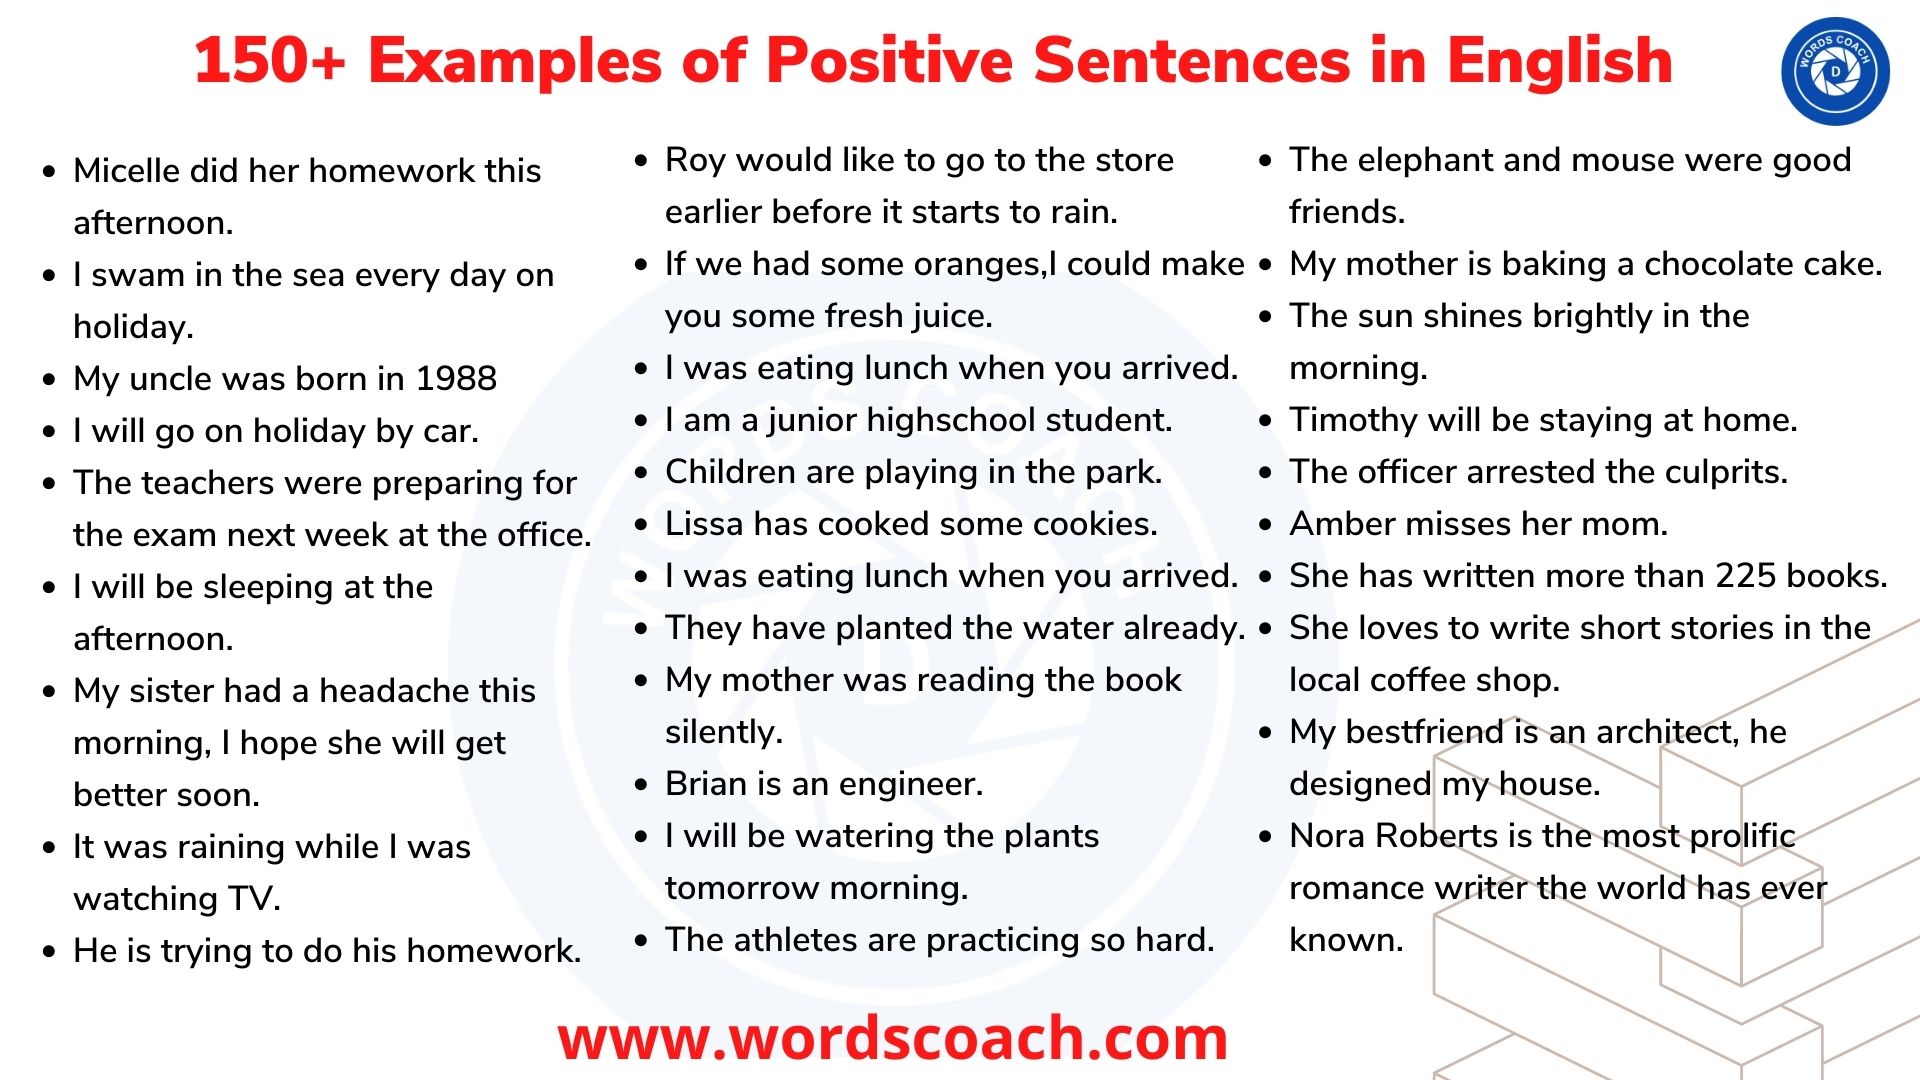 150+ Examples of Positive Sentences in English - wordscoach.com